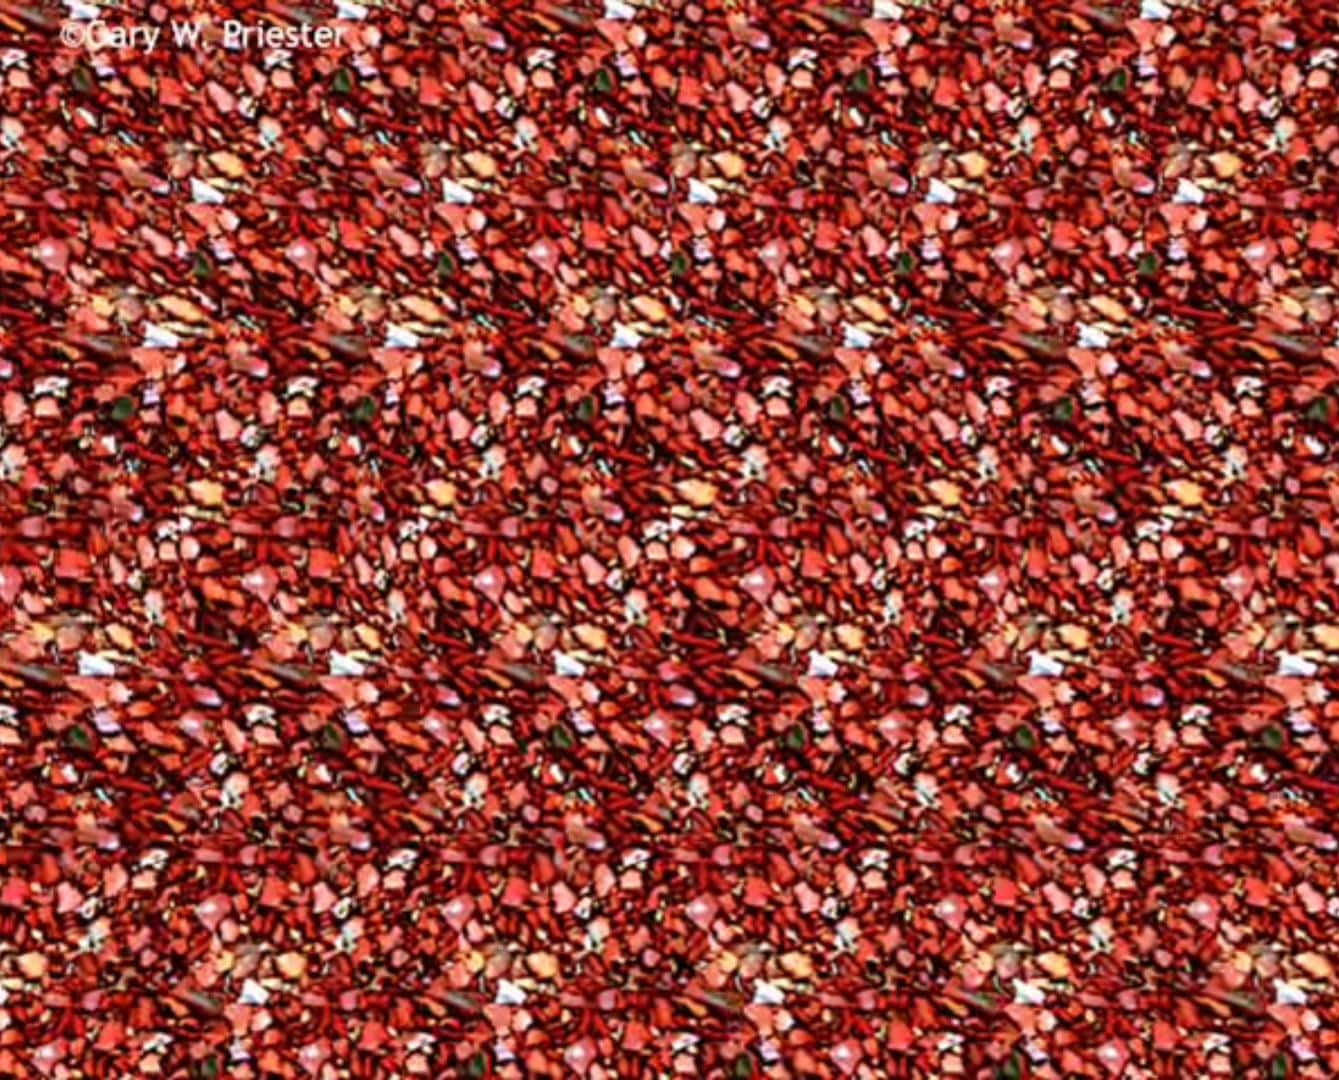 A Red And White Pattern With Pomegranate Seeds Wallpaper